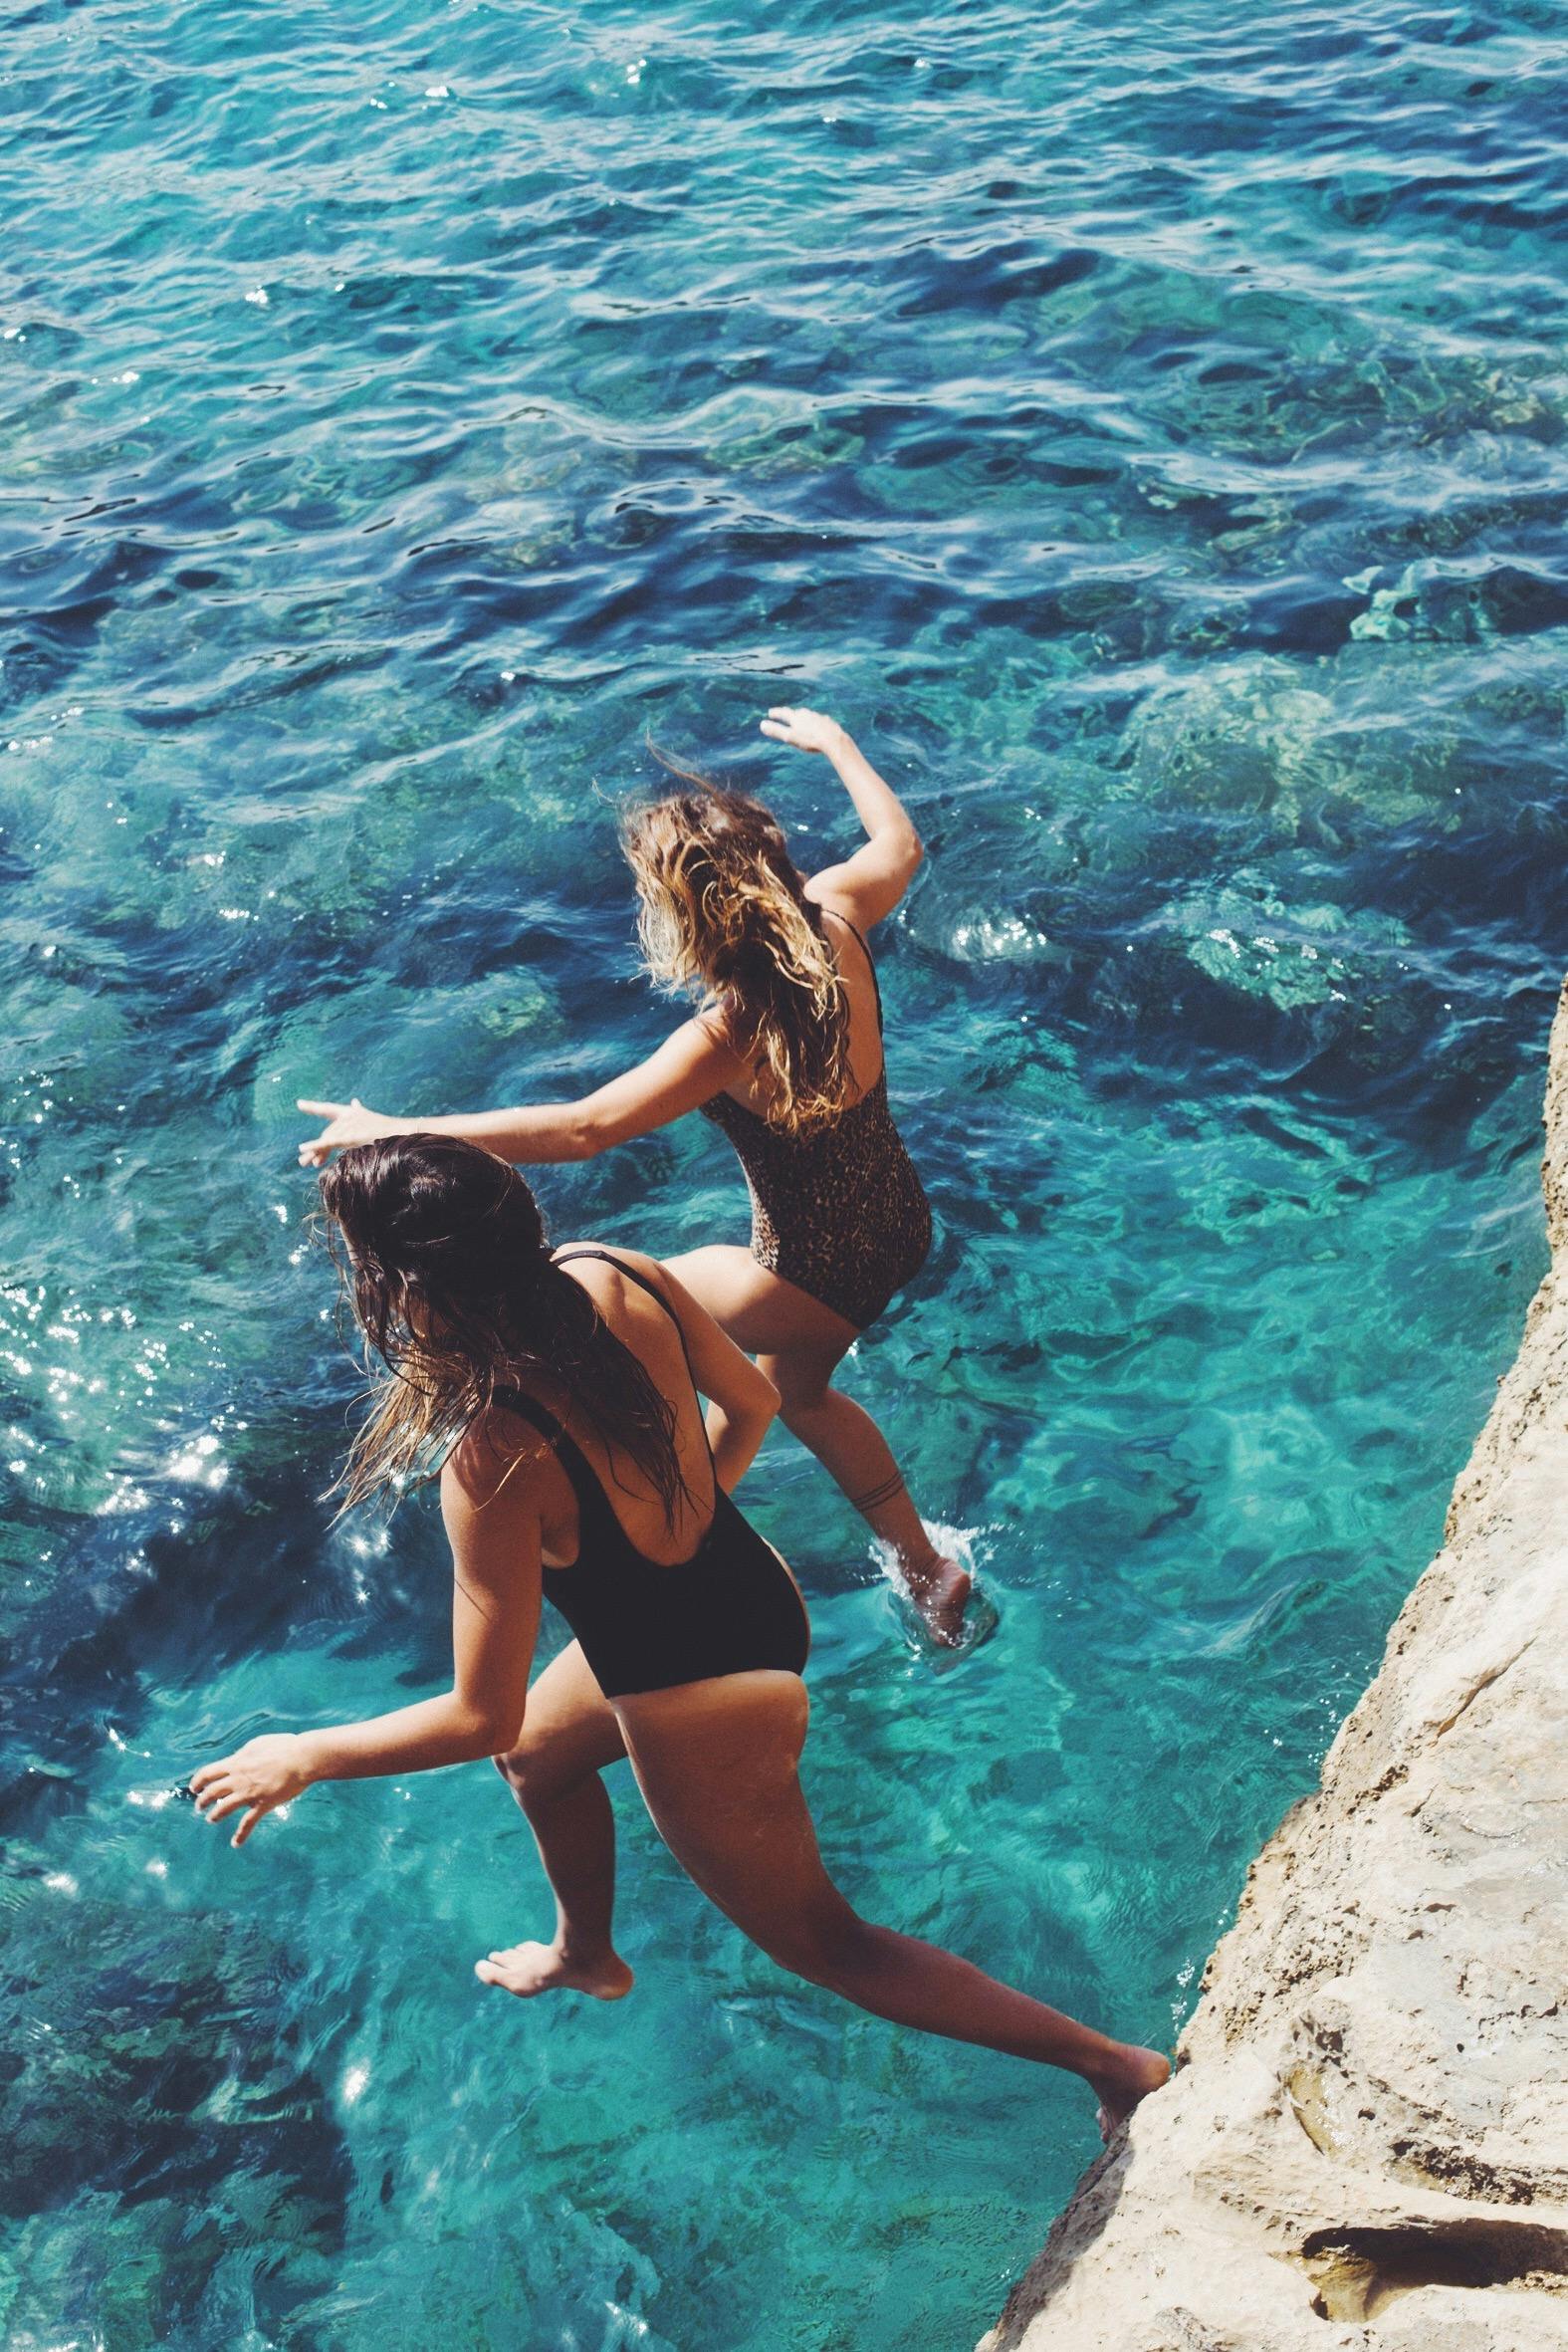 Girls jumping in the water